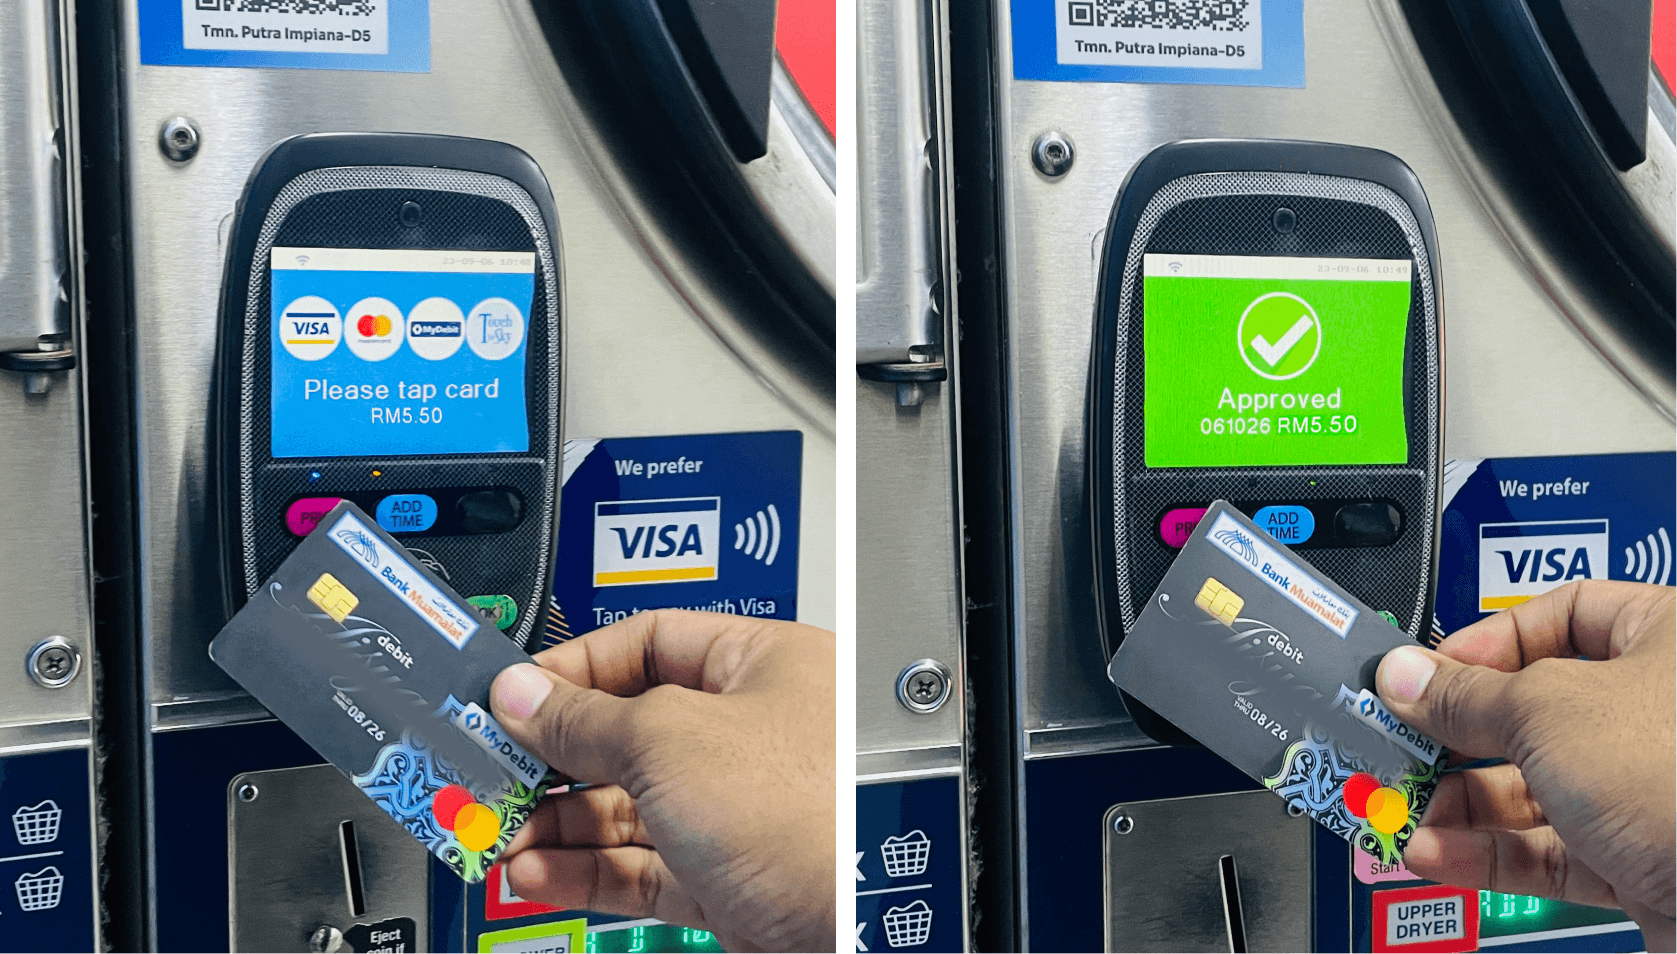 Payment through tapping the card on Paywave terminal on dryer